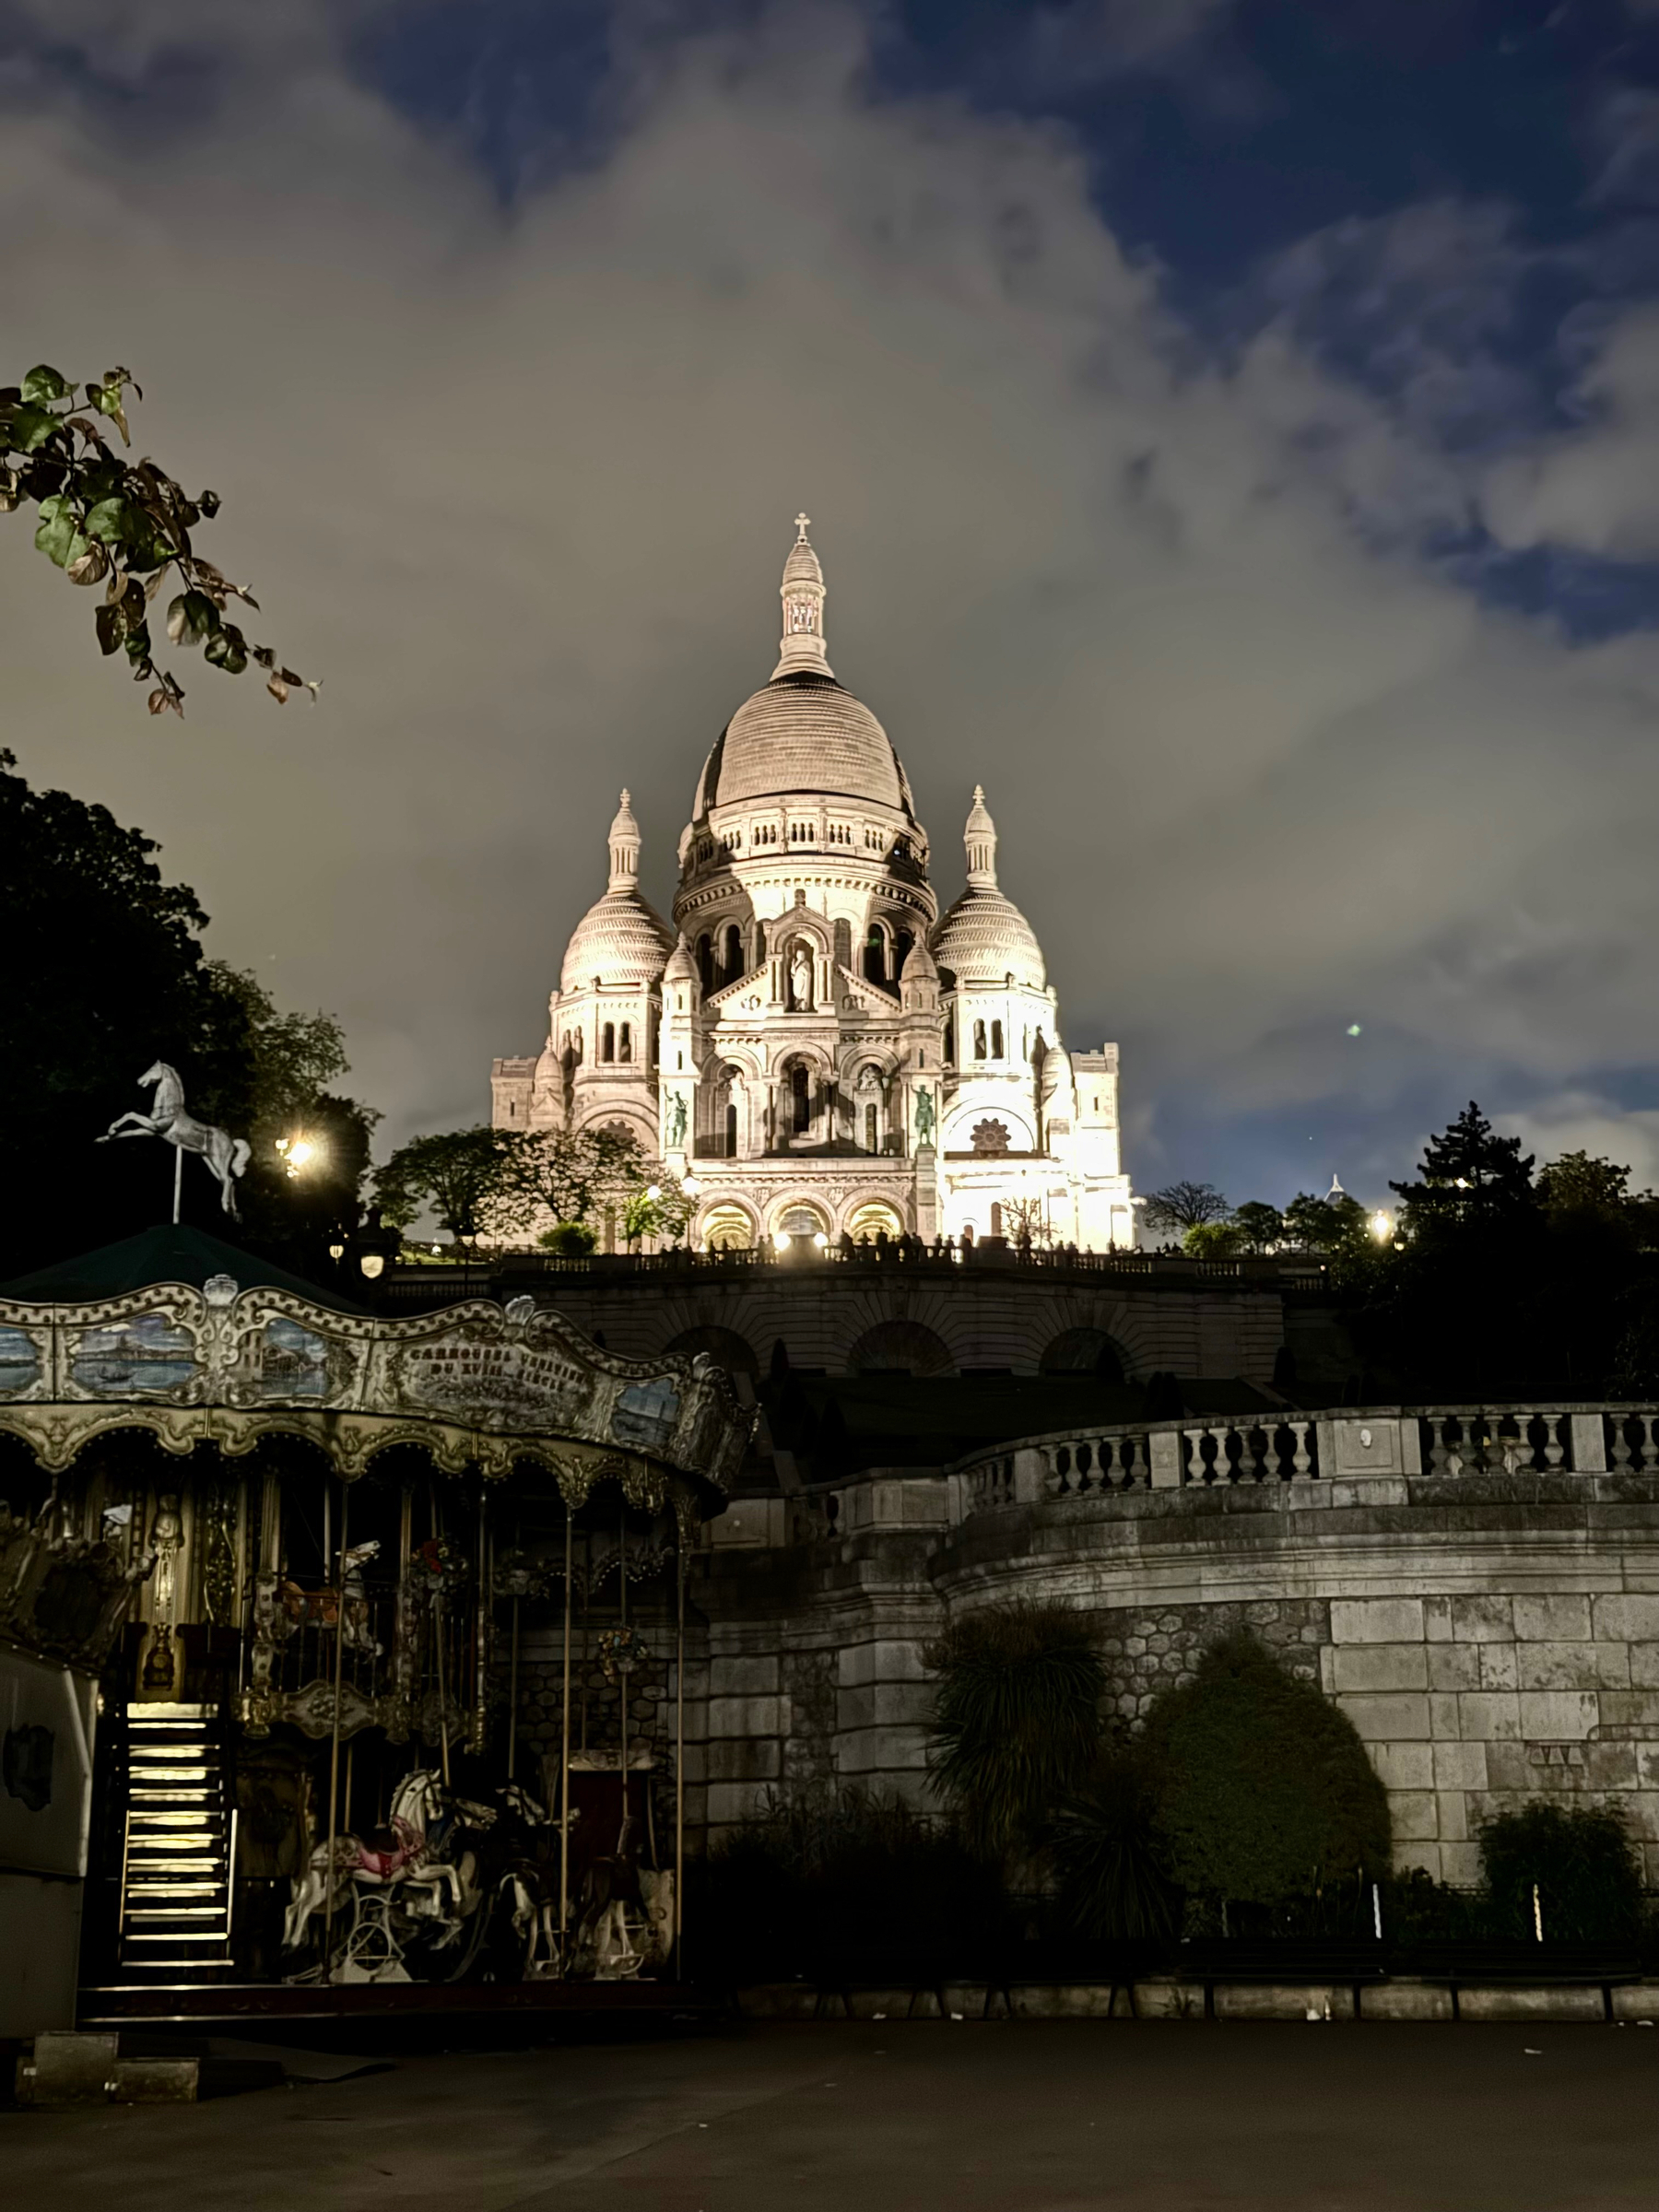 The image shows the Basilica of the Sacred Heart of Paris (Sacré-Cœur) illuminated at night, with a vintage carousel in the foreground, set against a backdrop of a dark evening sky with scattered clouds.